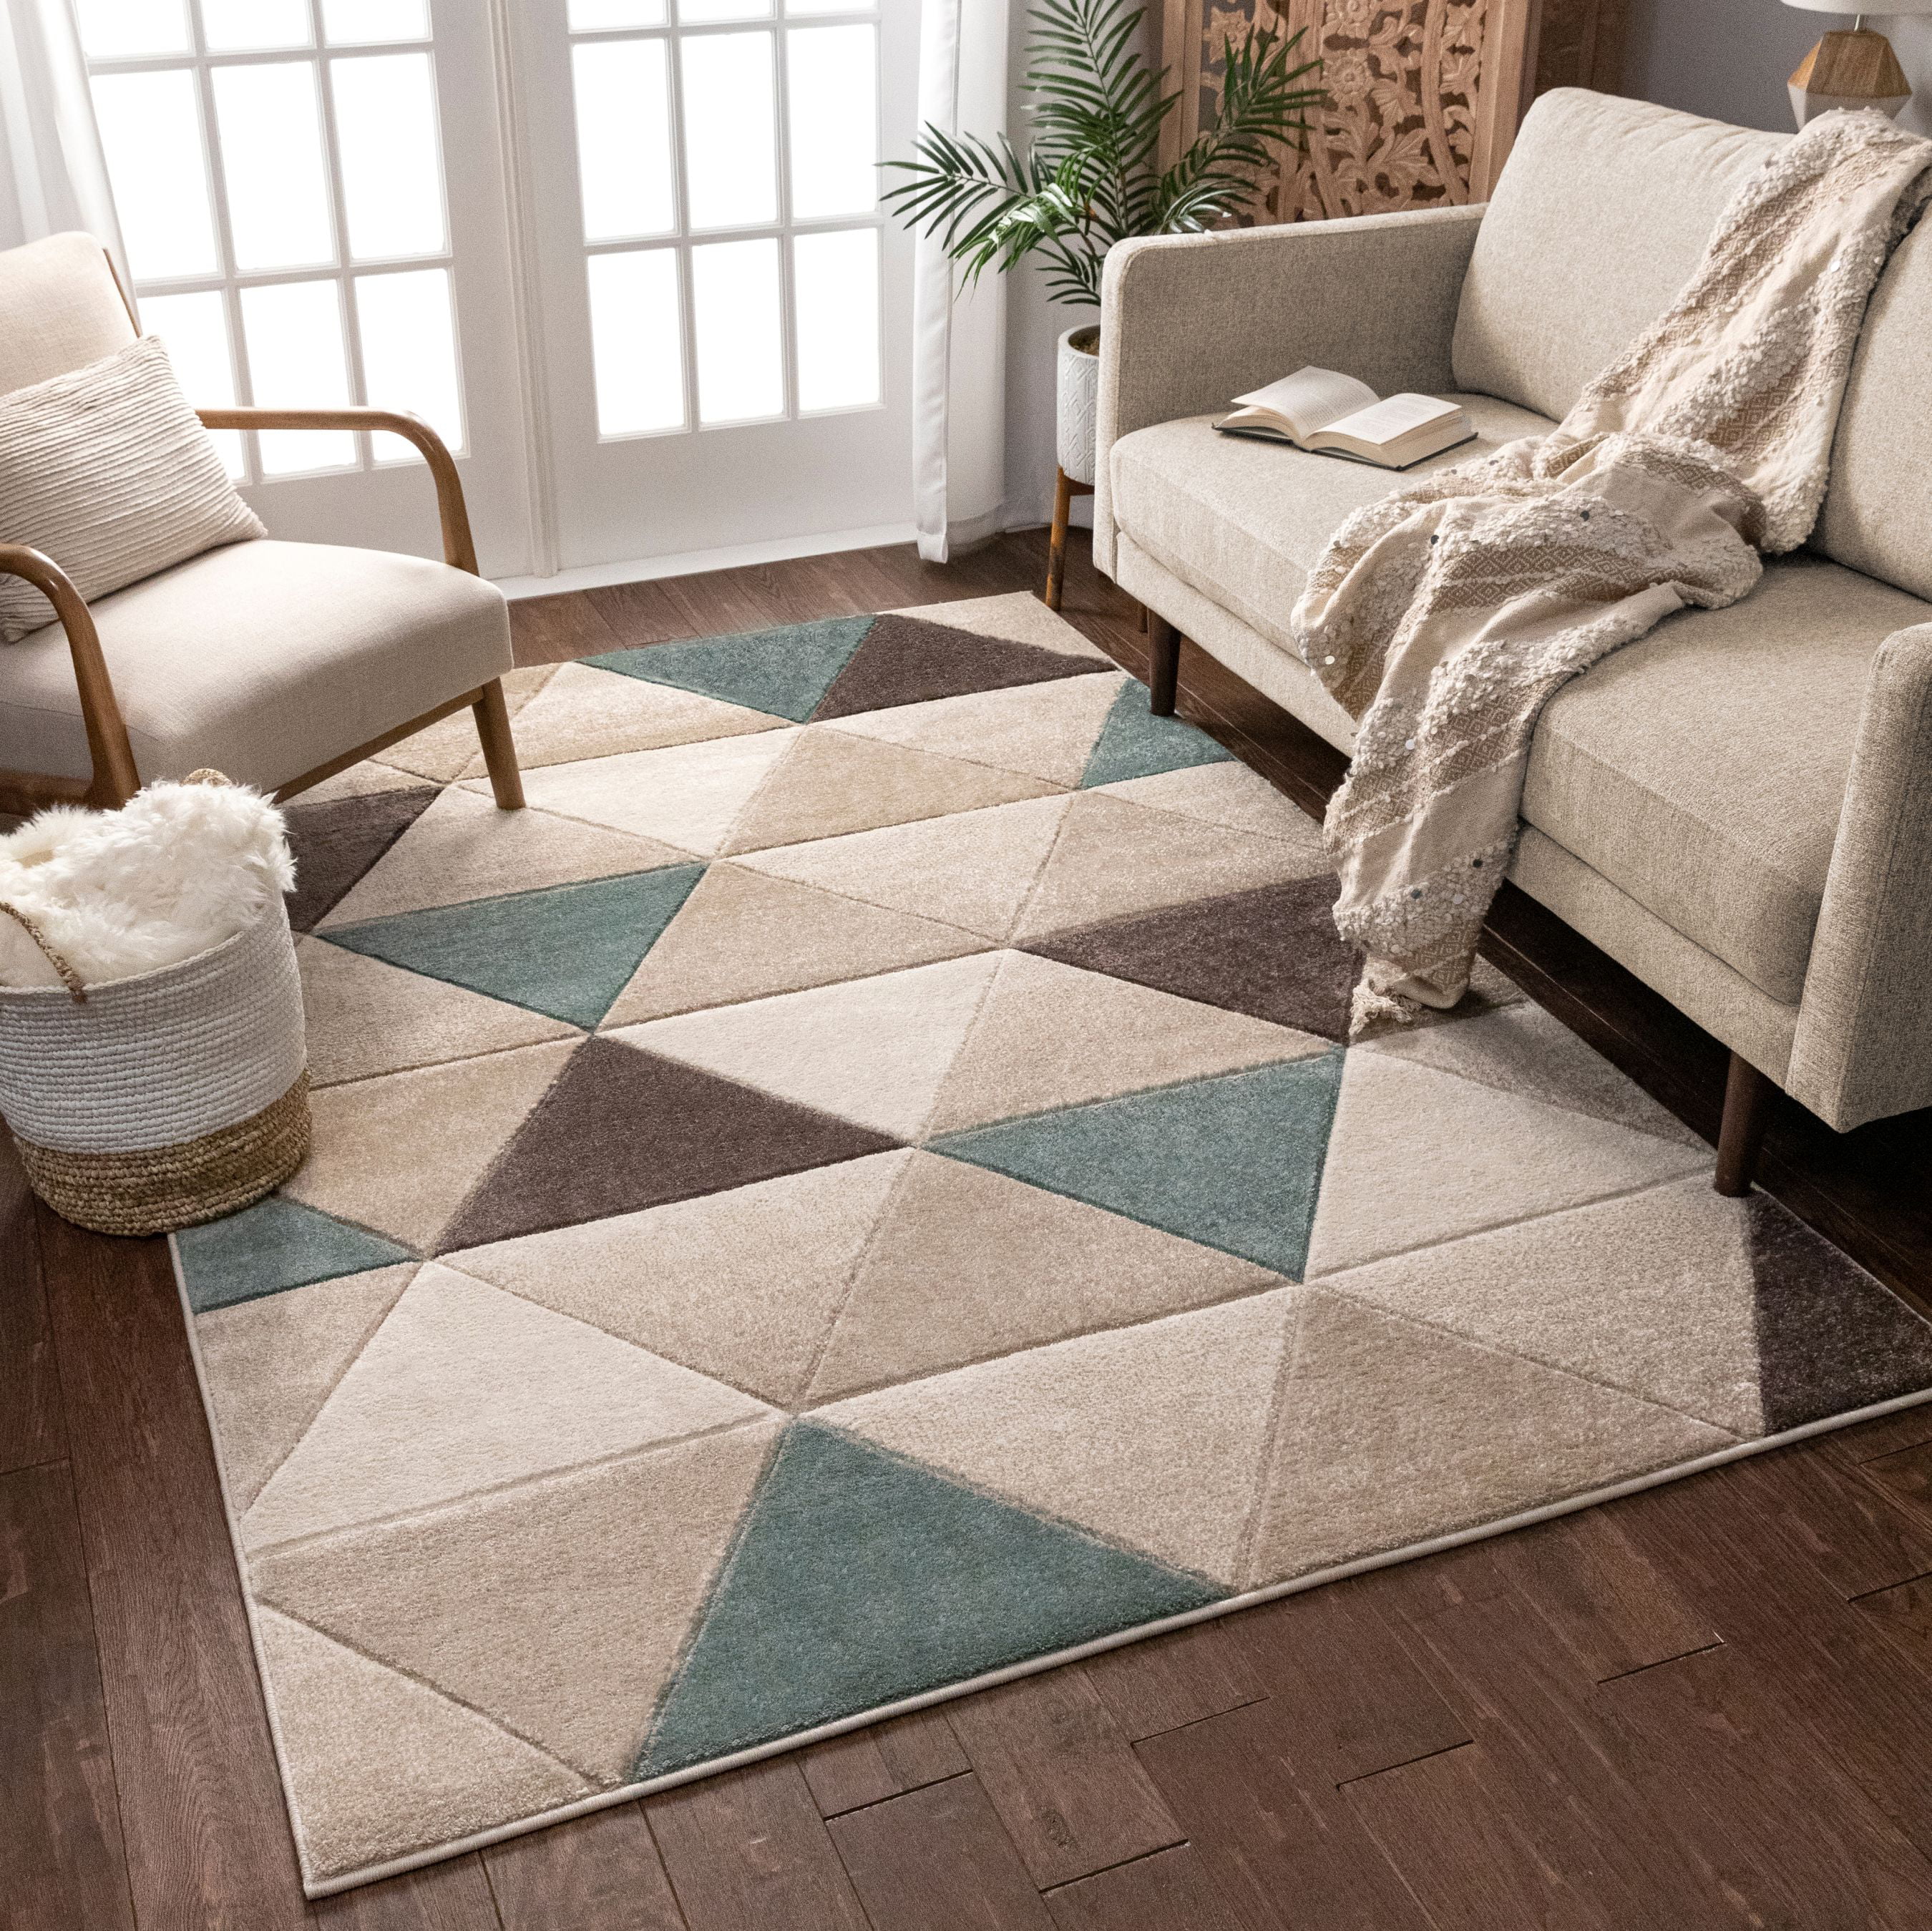 2' x 3' Area Rug Easy to Clean Stain & Fade Resistant Thick Soft Plush Well Woven Suave Angles Brown & Blue Modern Geometric Triangles Hand Carved 2x3 